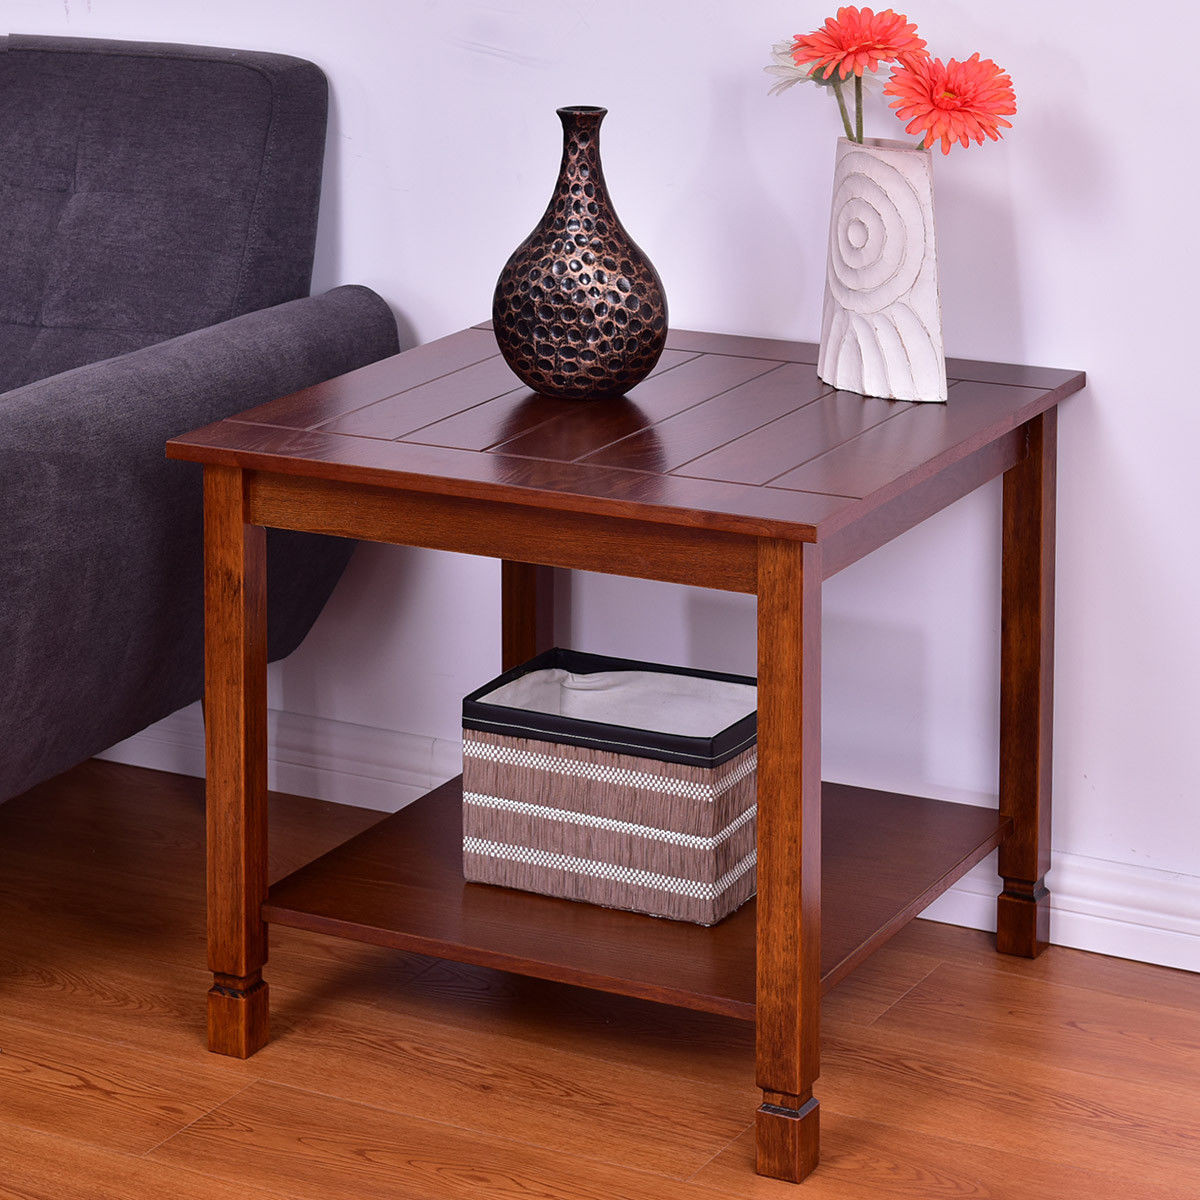 Side Table For Living Room
 Giantex Wood Side Table Living Room End Table Night Stand